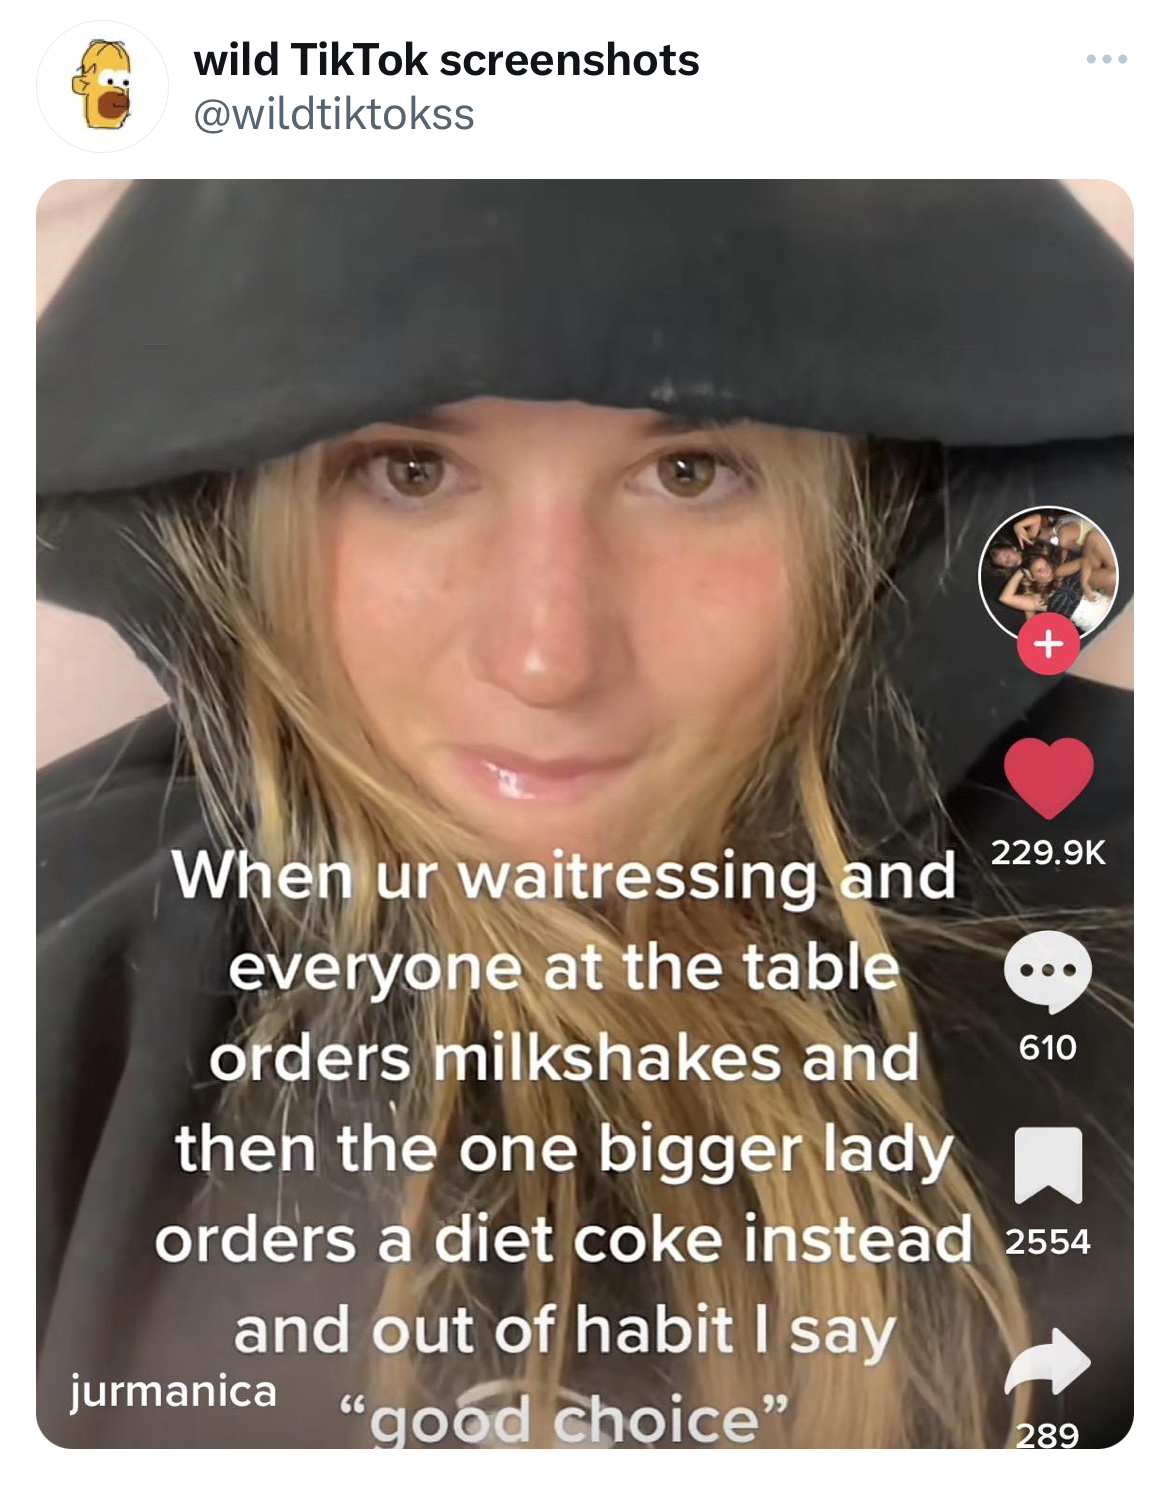 Savage and Unhinged tweets photo caption - wild TikTok screenshots When ur waitressing and everyone at the table orders milkshakes and then the one bigger lady orders a diet coke instead 2554 and out of habit I say "good choice" jurmanica 610 289